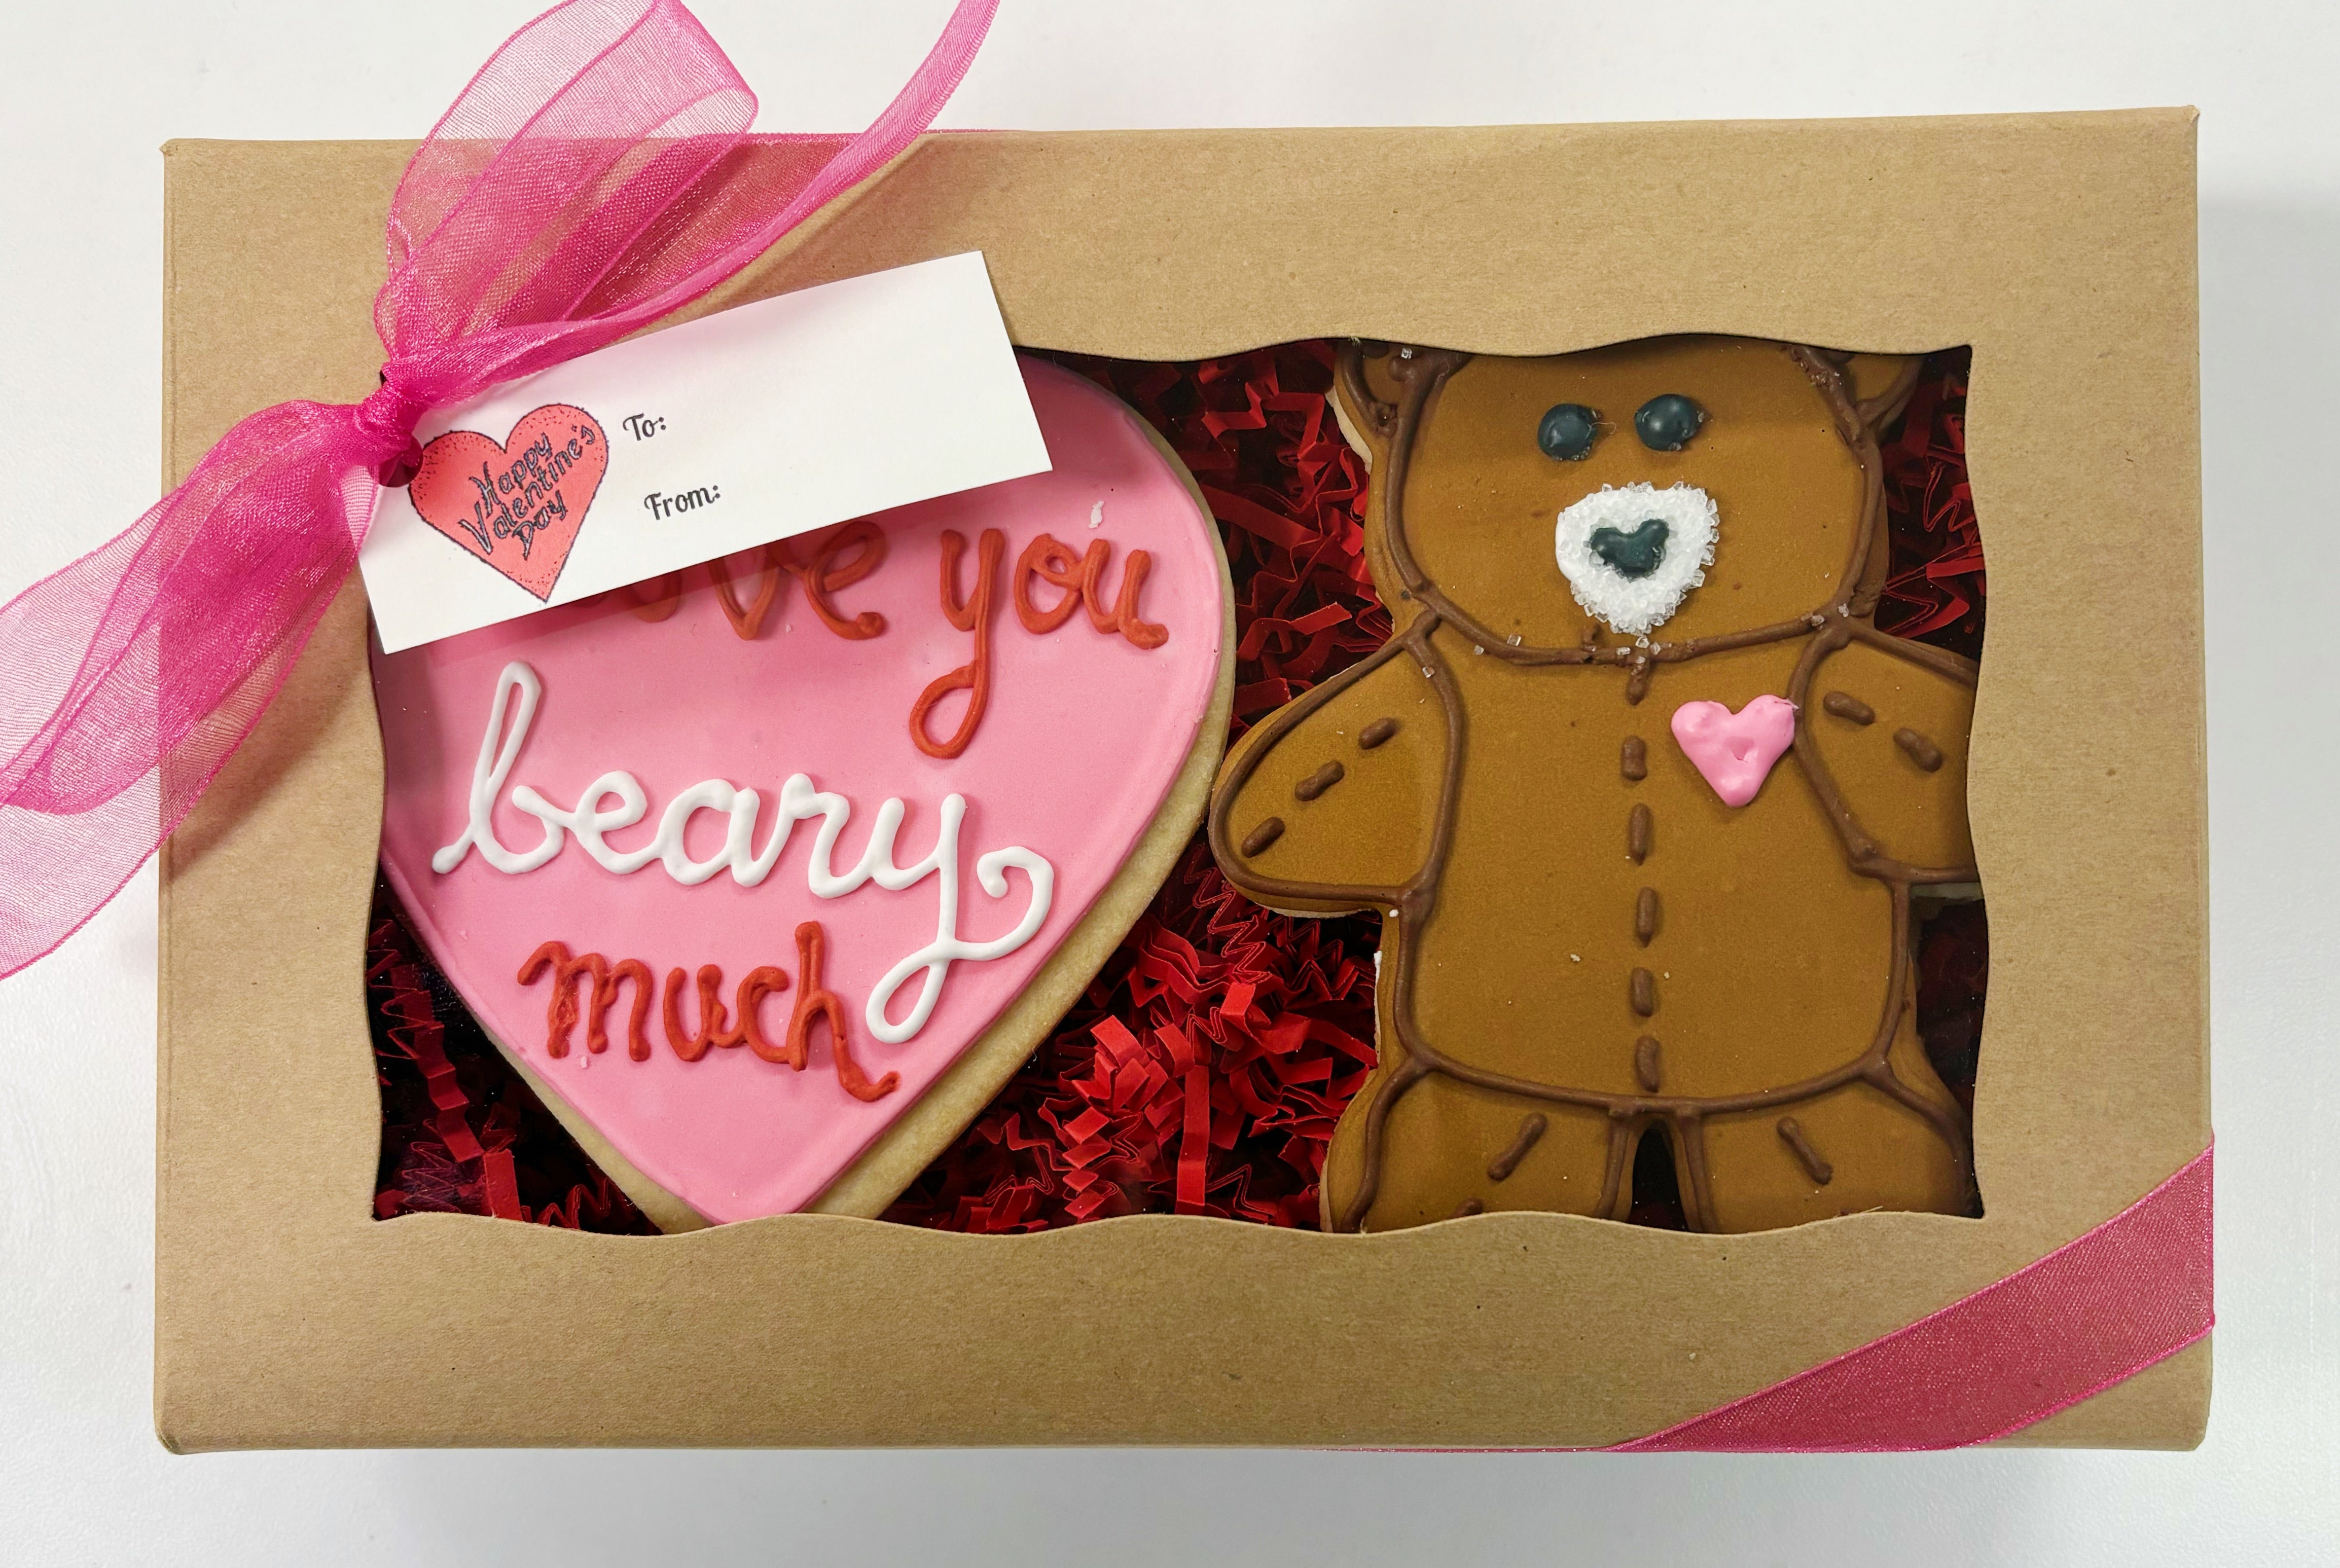 VALENTINE "I LOVE YOU BEARY MUCH" COOKIE GIFT BOX